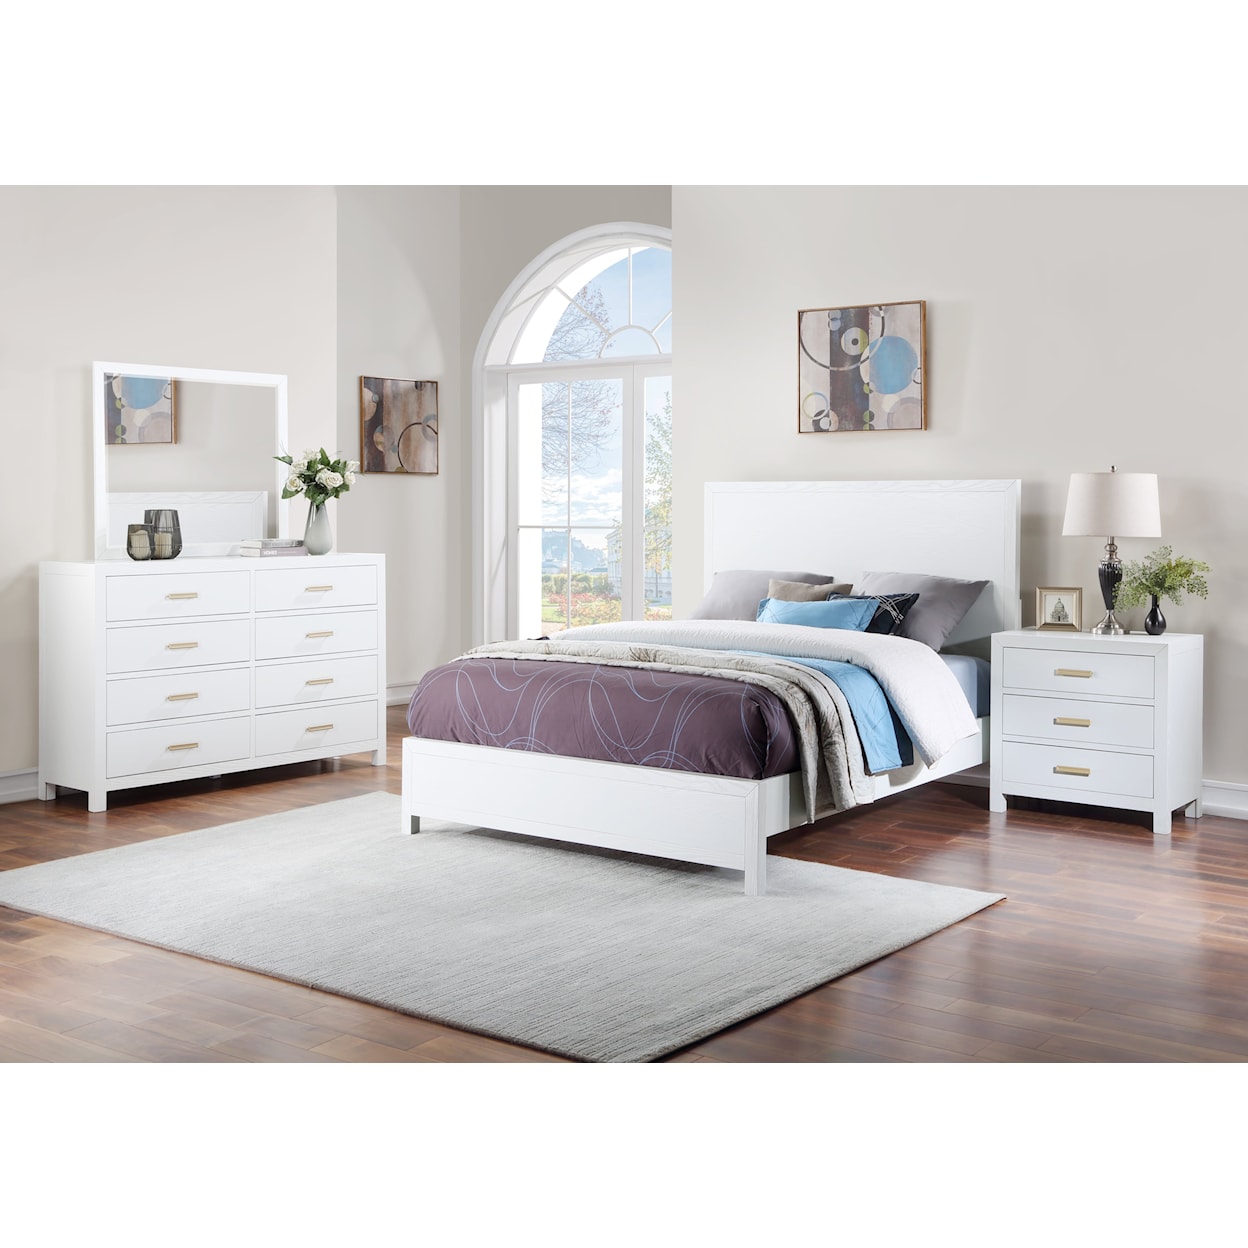 Winners Only Fresno Panel Queen Bed